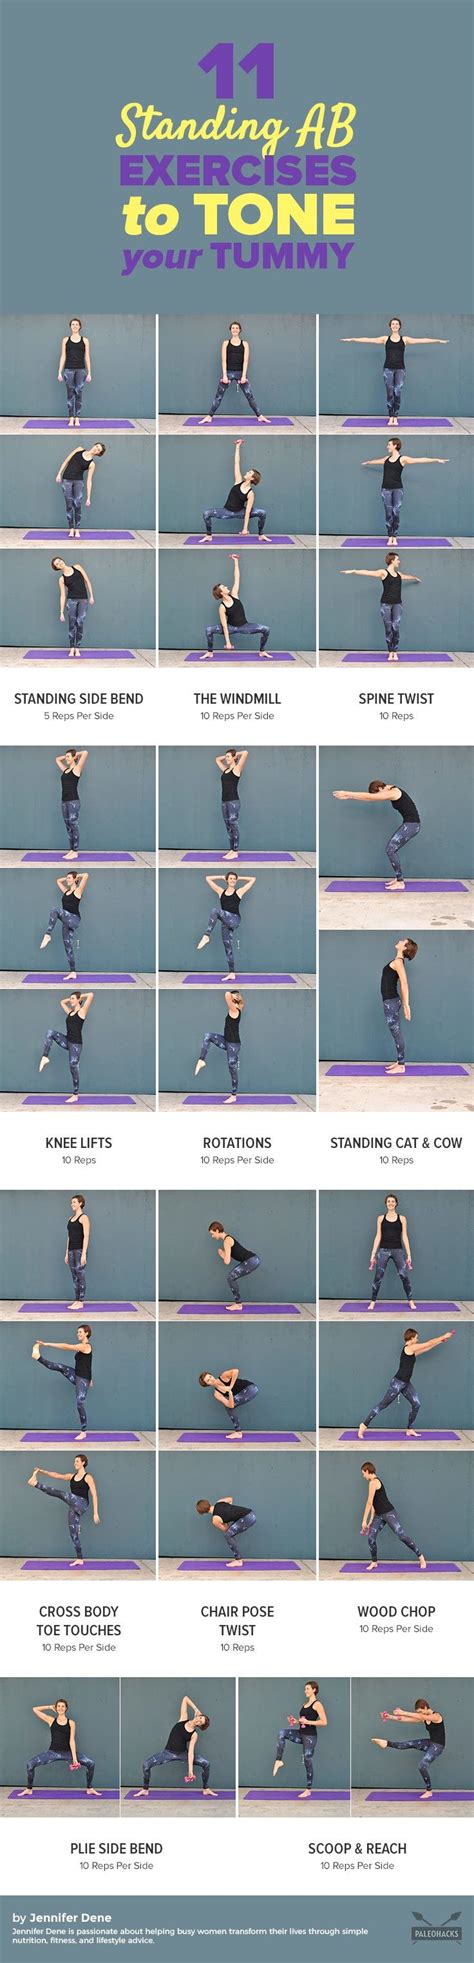 Tone And Strengthen Your Tummy Anywhere With These Easy Standing Ab Exercises The Added